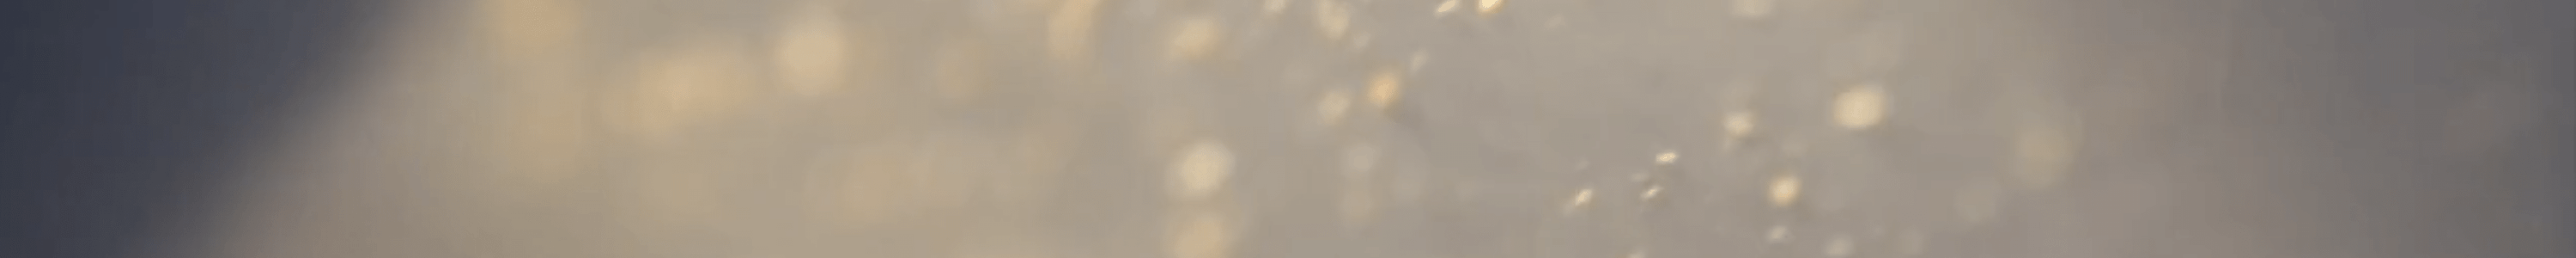 An abstract image of light yellow dust particles or microbes on a light grey hue